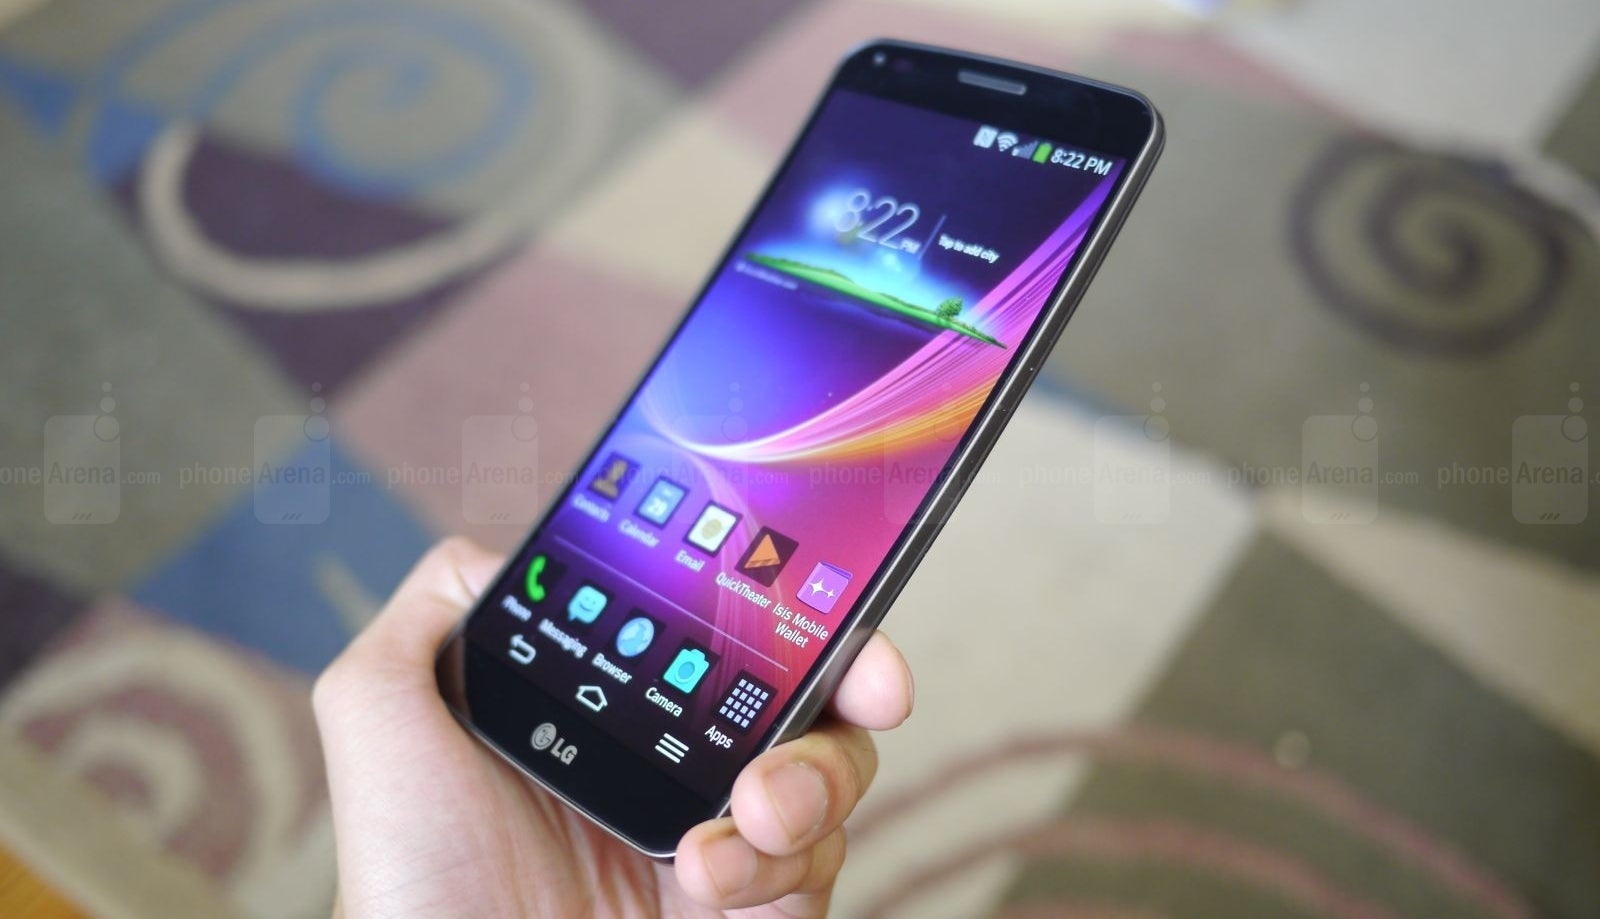 LG G Flex 2 expected be announced at CES 2015